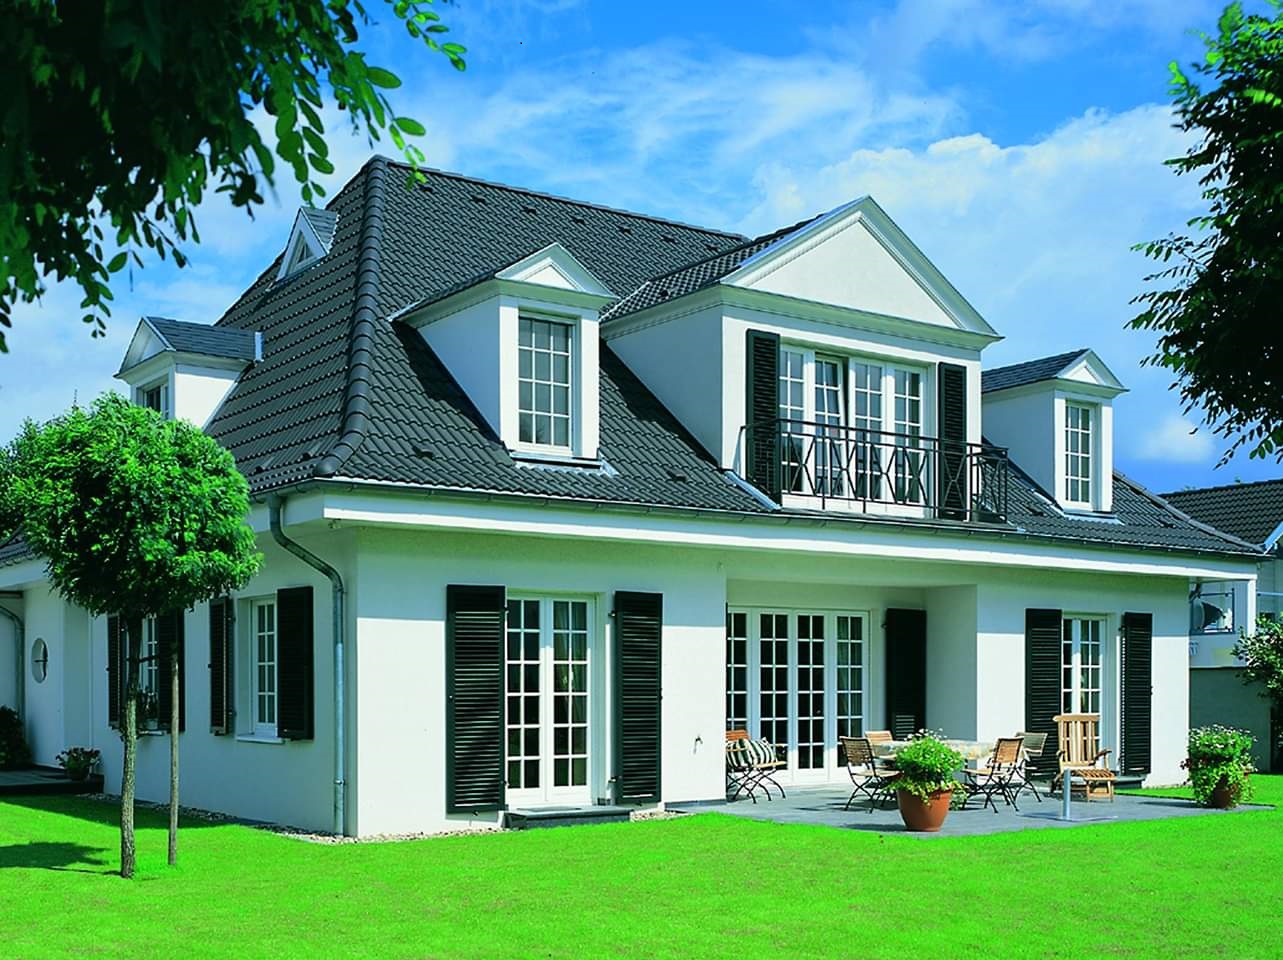 4 REASONS YOU SHOULD CONSIDER WITH CLAY ROOF TILES